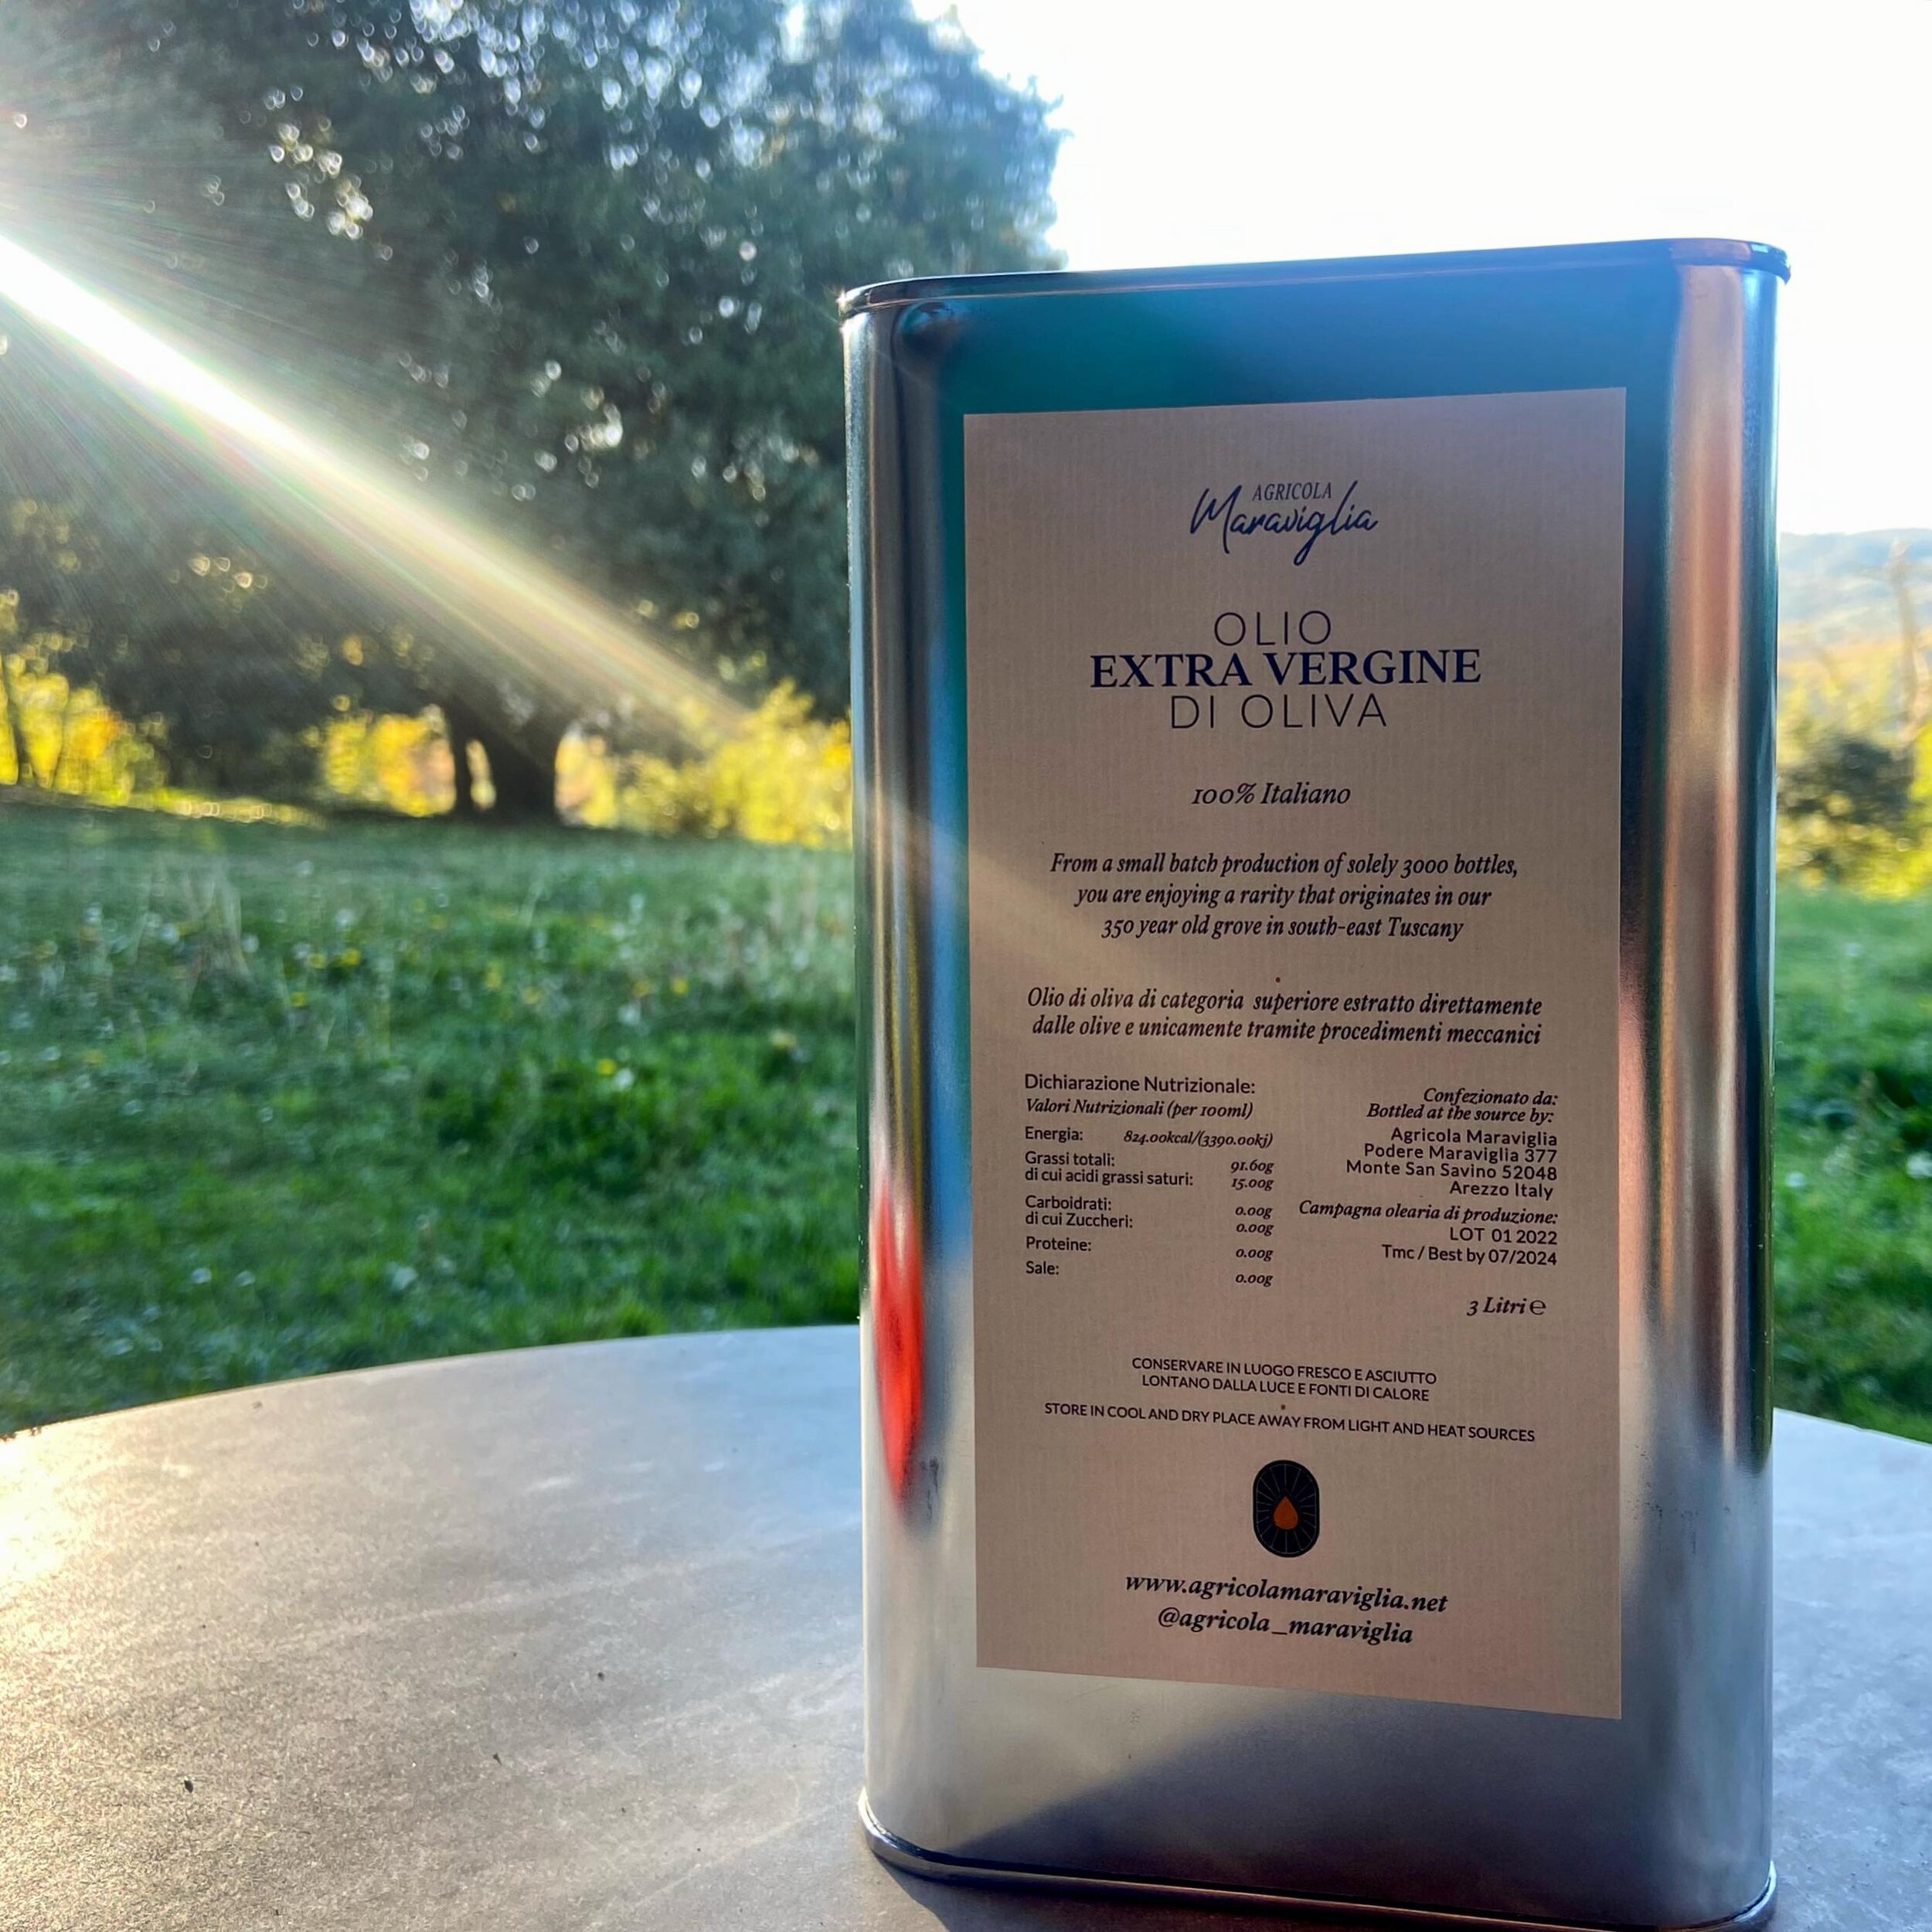 Join our limited edition subscription, you will receive a replenishing delivery of Maraviglia EVOO TIN every 3, 4 or 6 months ⚡️Info in Bio⚡️
#AgricolaTuscany